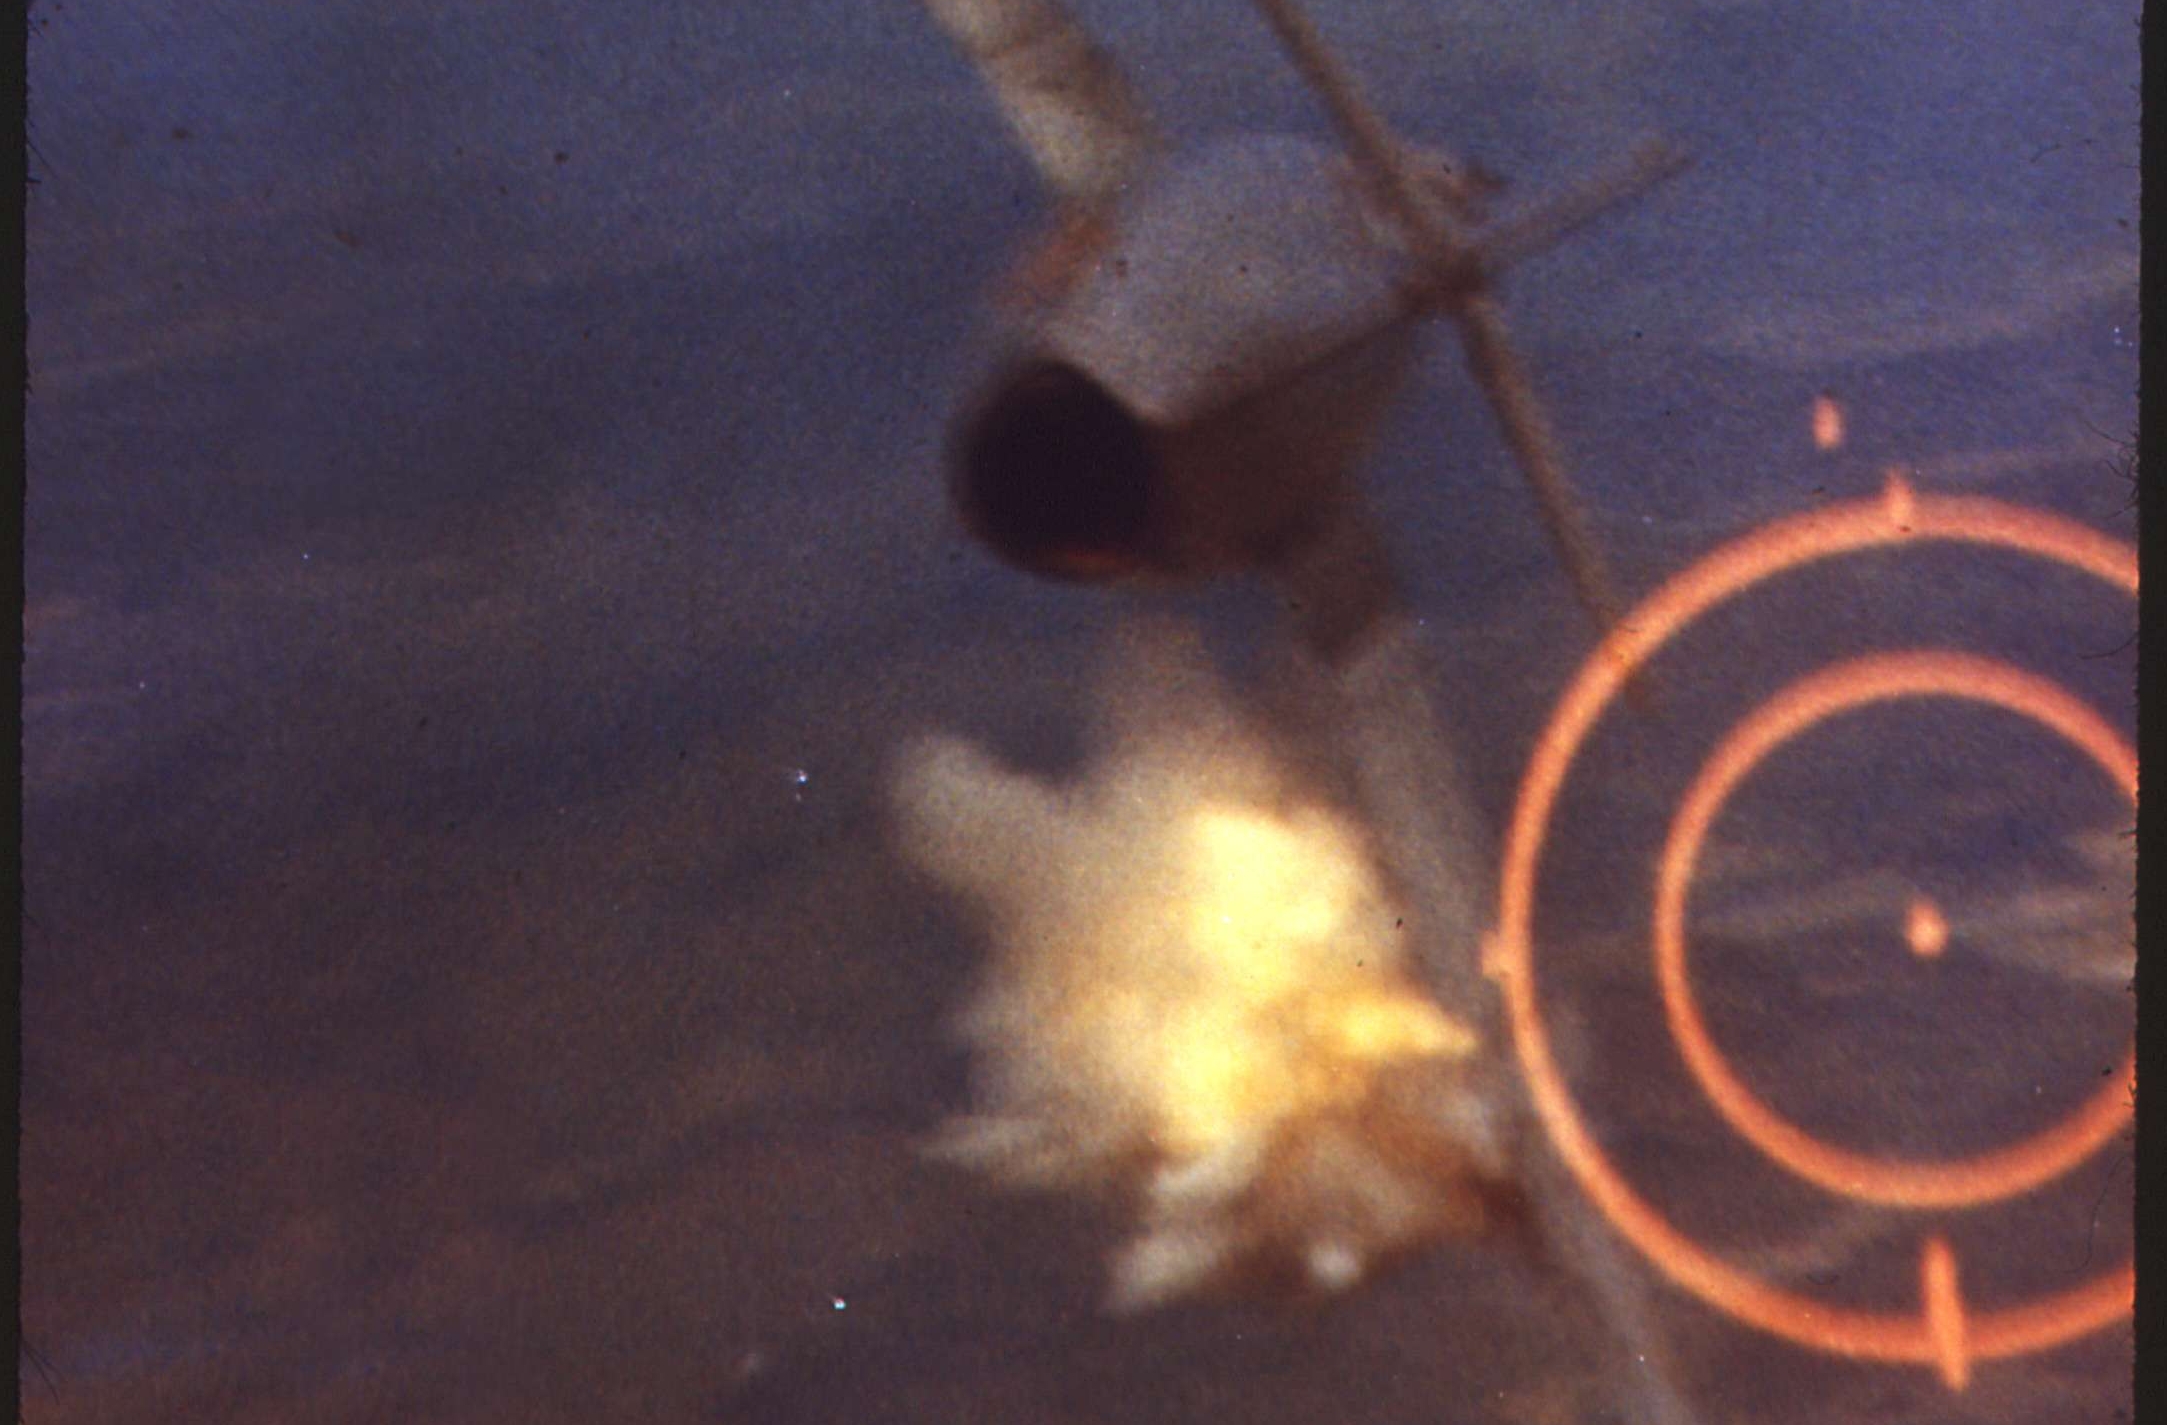 Major Kuster Hits the MIG Near the Fuselage and it Bursts into Flames